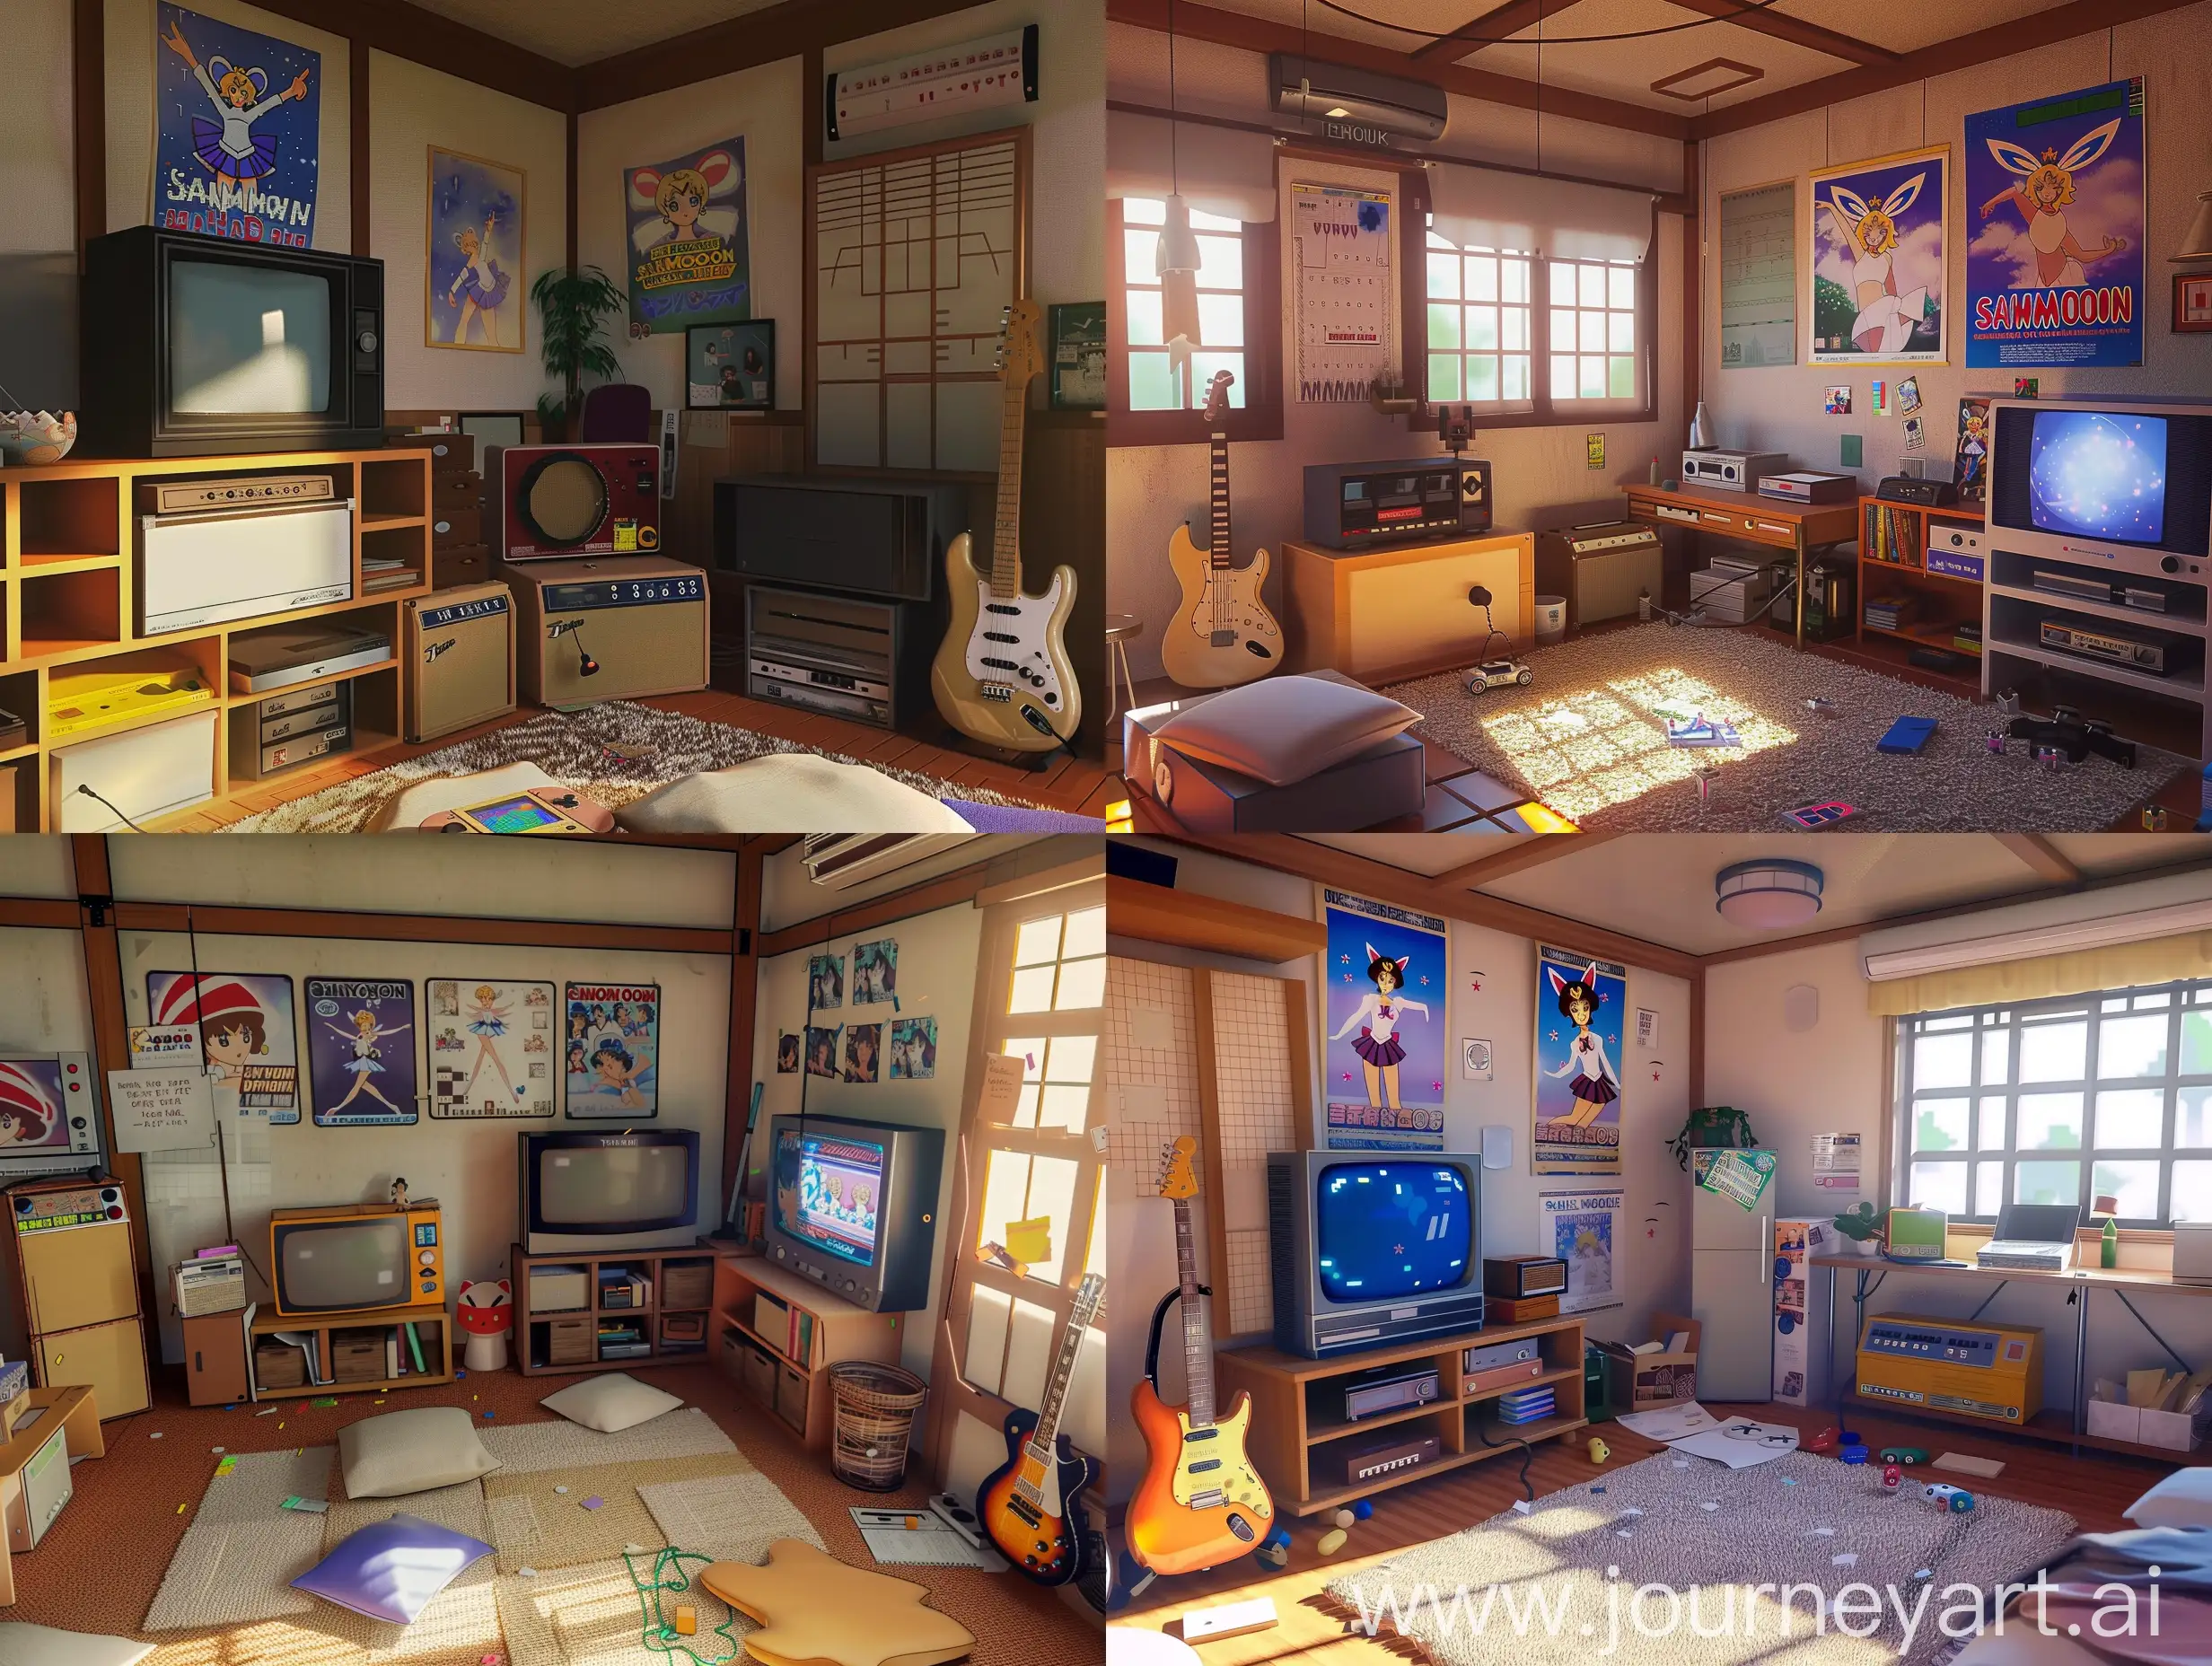 Retro-Japanese-Room-with-Pixel-Art-and-Sailor-Moon-Decor